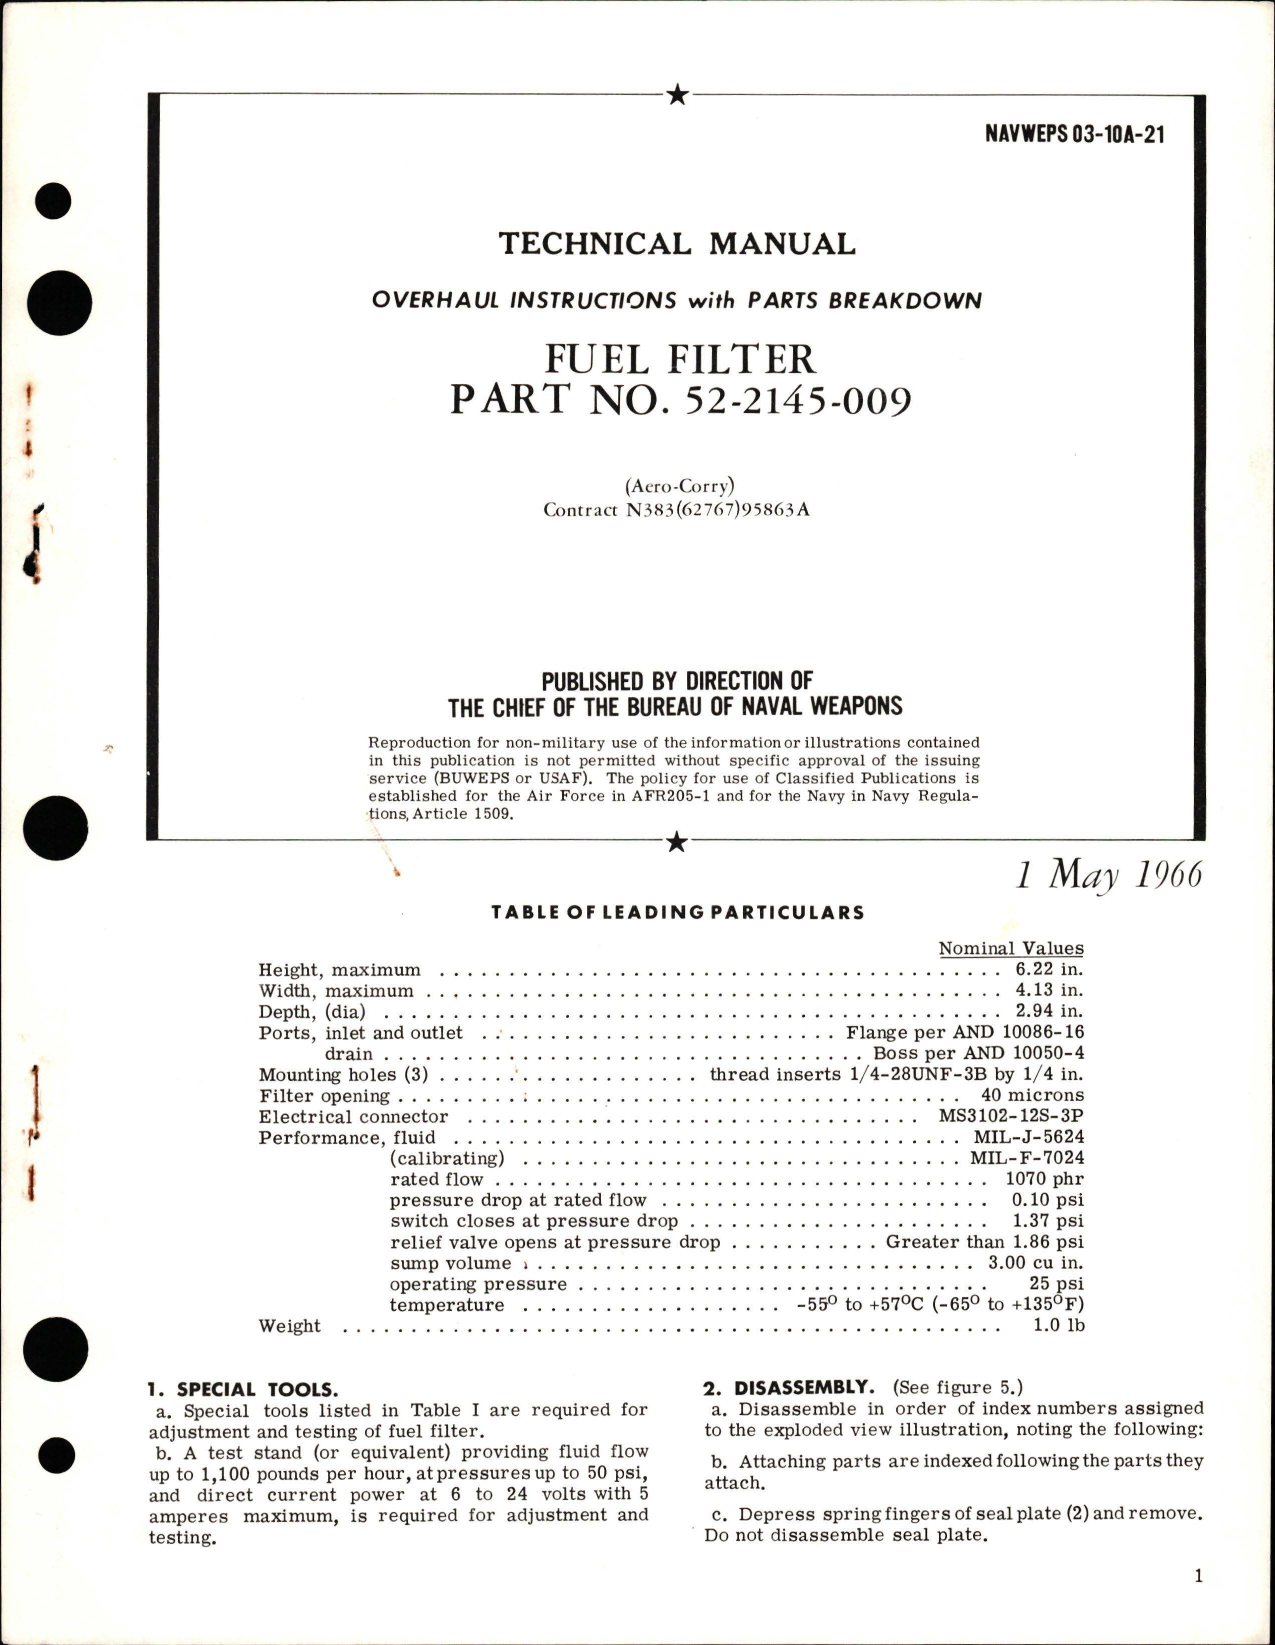 Sample page 1 from AirCorps Library document: Overhaul Instructions with Parts Breakdown for Fuel Filter - Part 52-2145-009